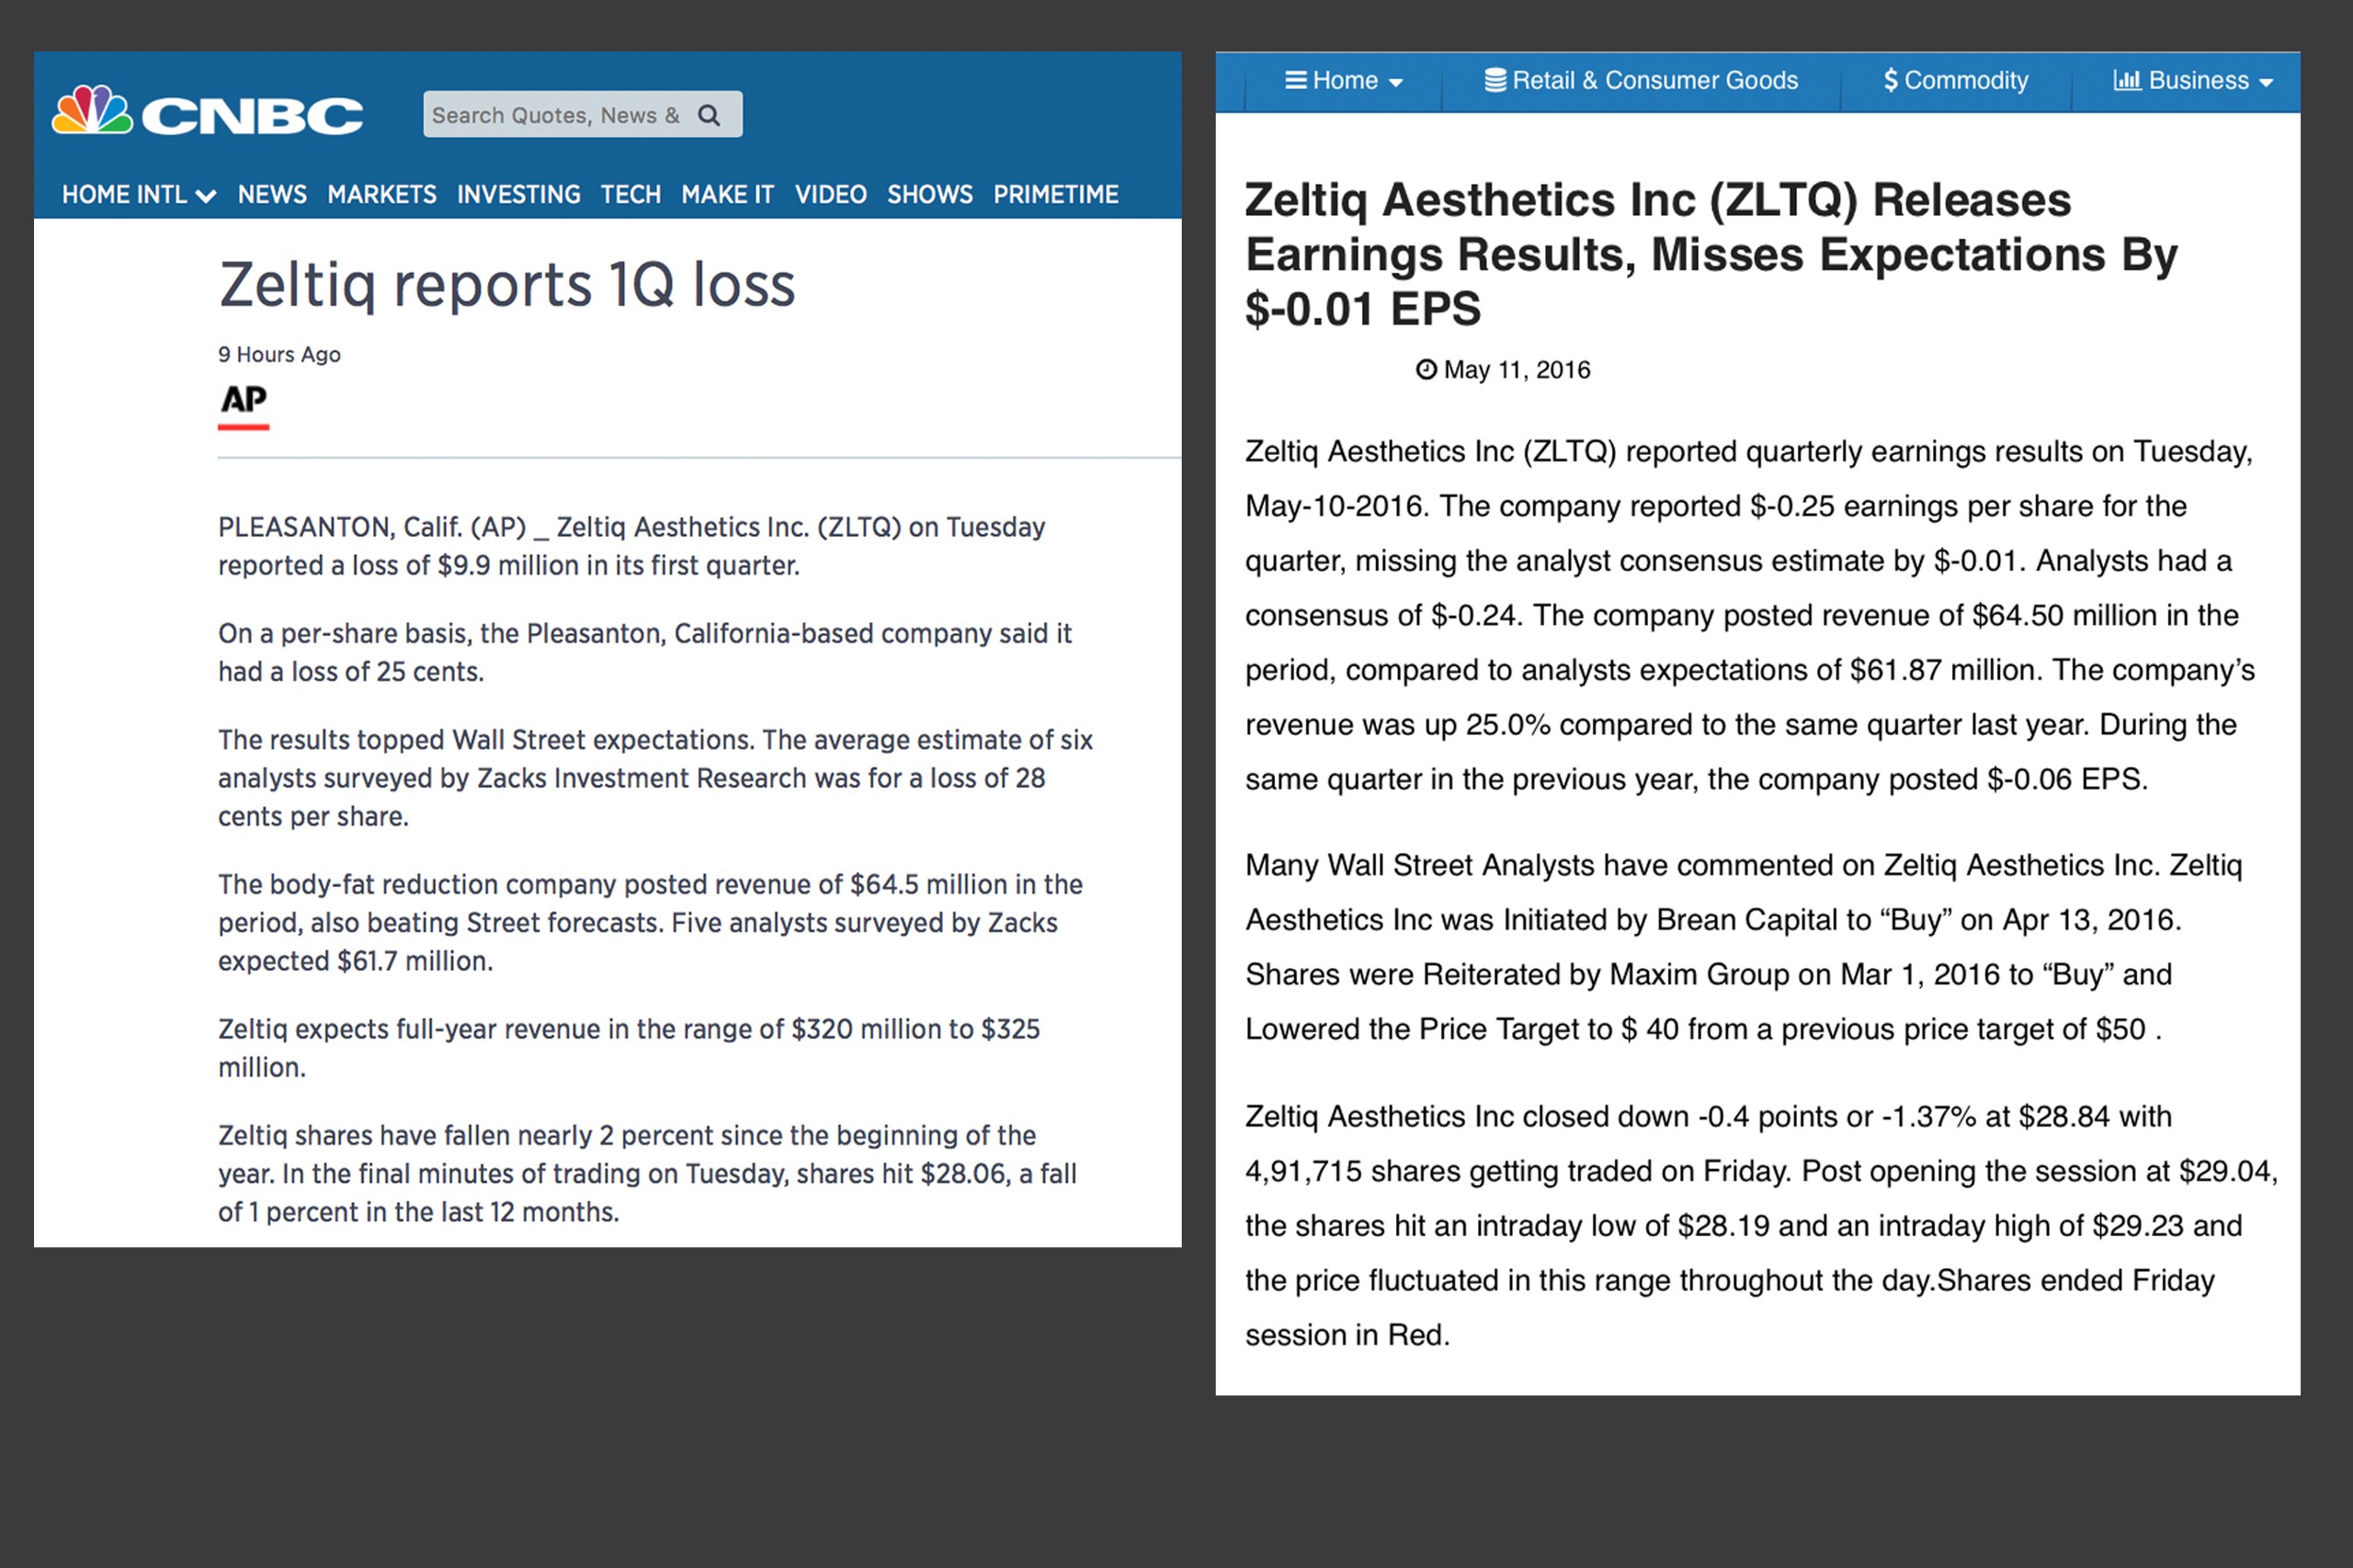 Two CNBC news stories about a company called Zeltiq reporting a 1Q loss of $9.9 million. The two stories are functionally near-identical.